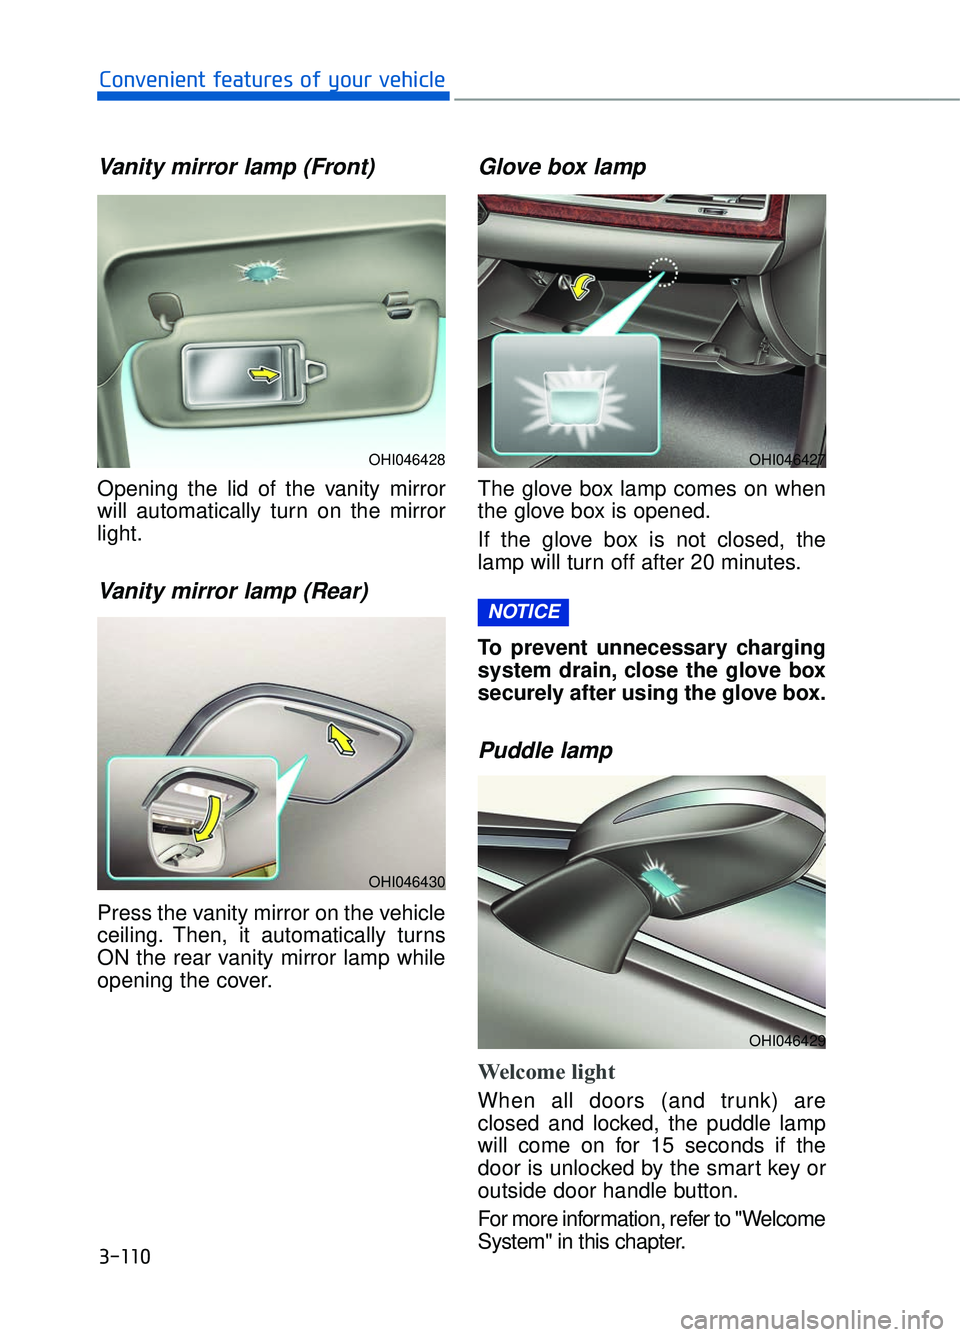 GENESIS G90 2018 Owners Guide 3-110
Convenient features of your vehicle
Vanity mirror lamp (Front)
Opening the lid of the vanity mirror
will automatically turn on the mirror
light.
Vanity mirror lamp (Rear)
Press the vanity mirror